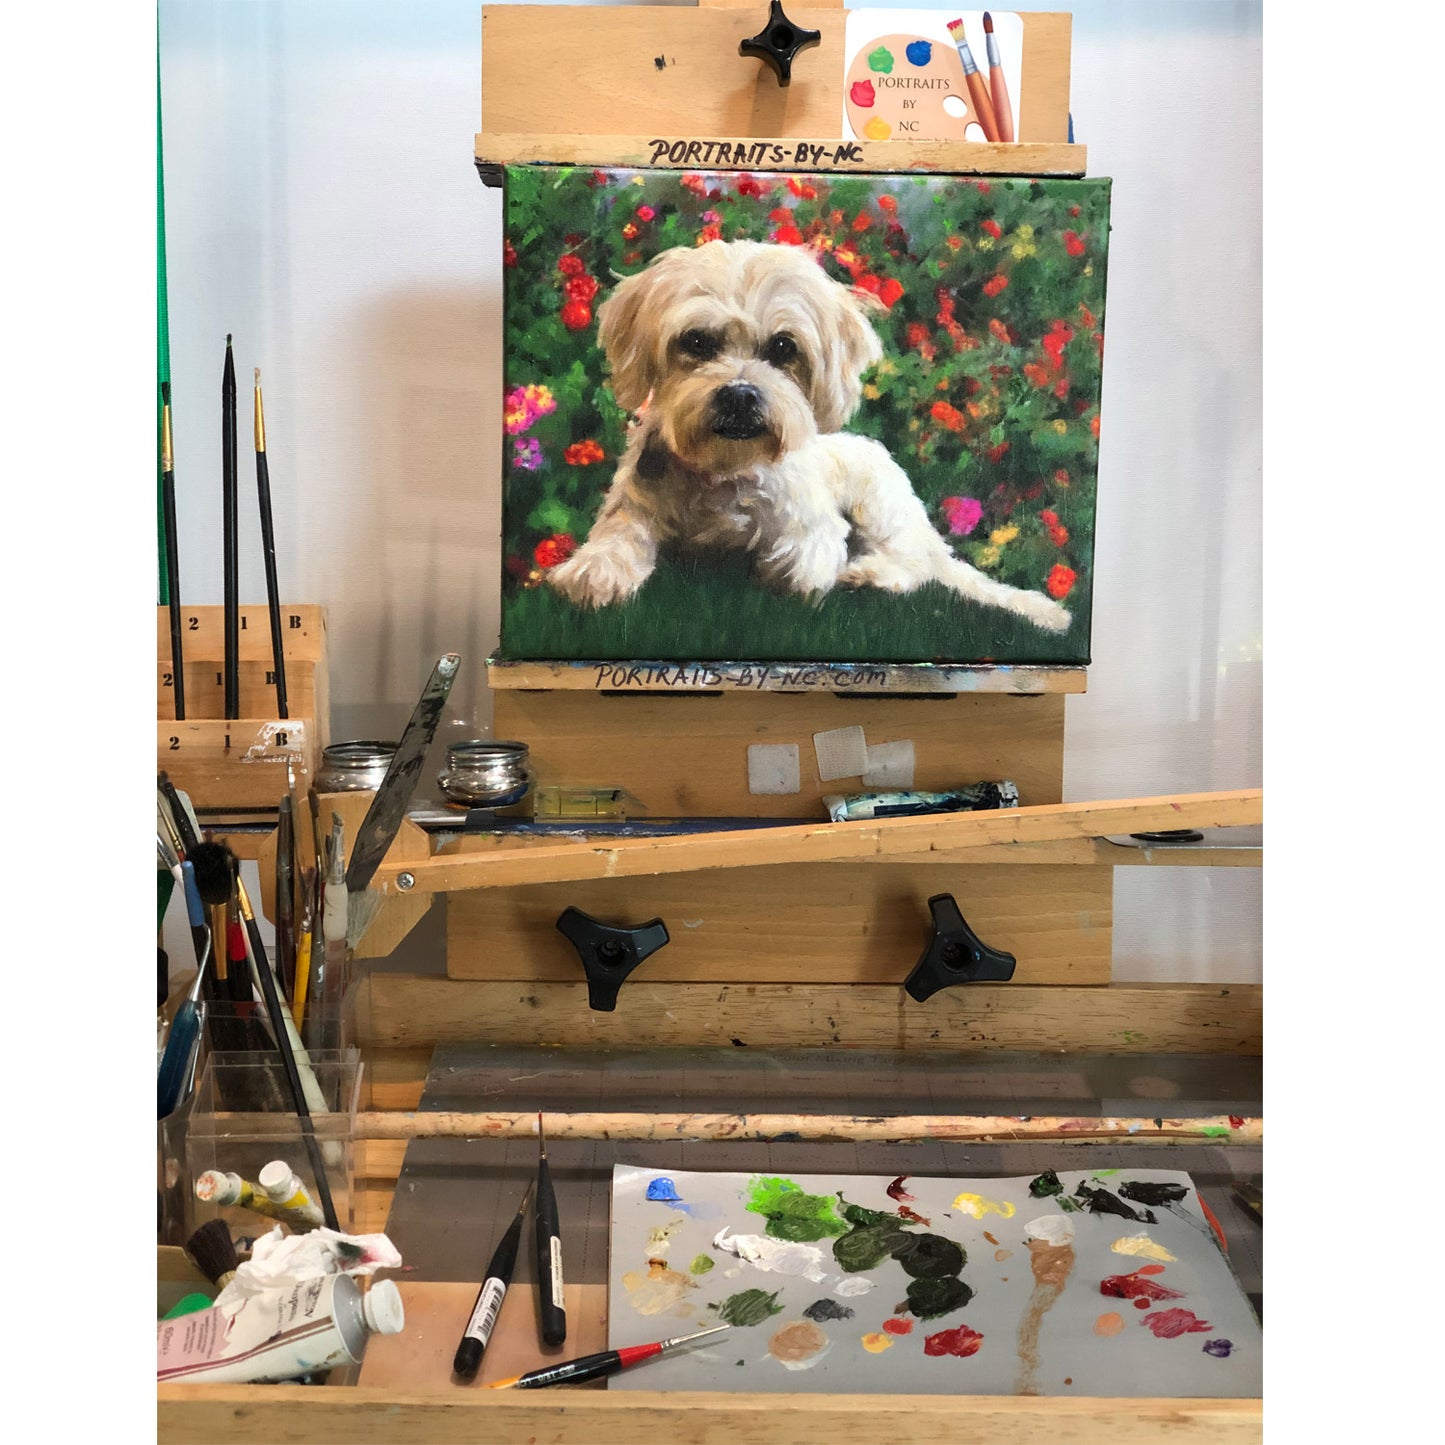 Lhasa Apso/poodle mix painting on easel